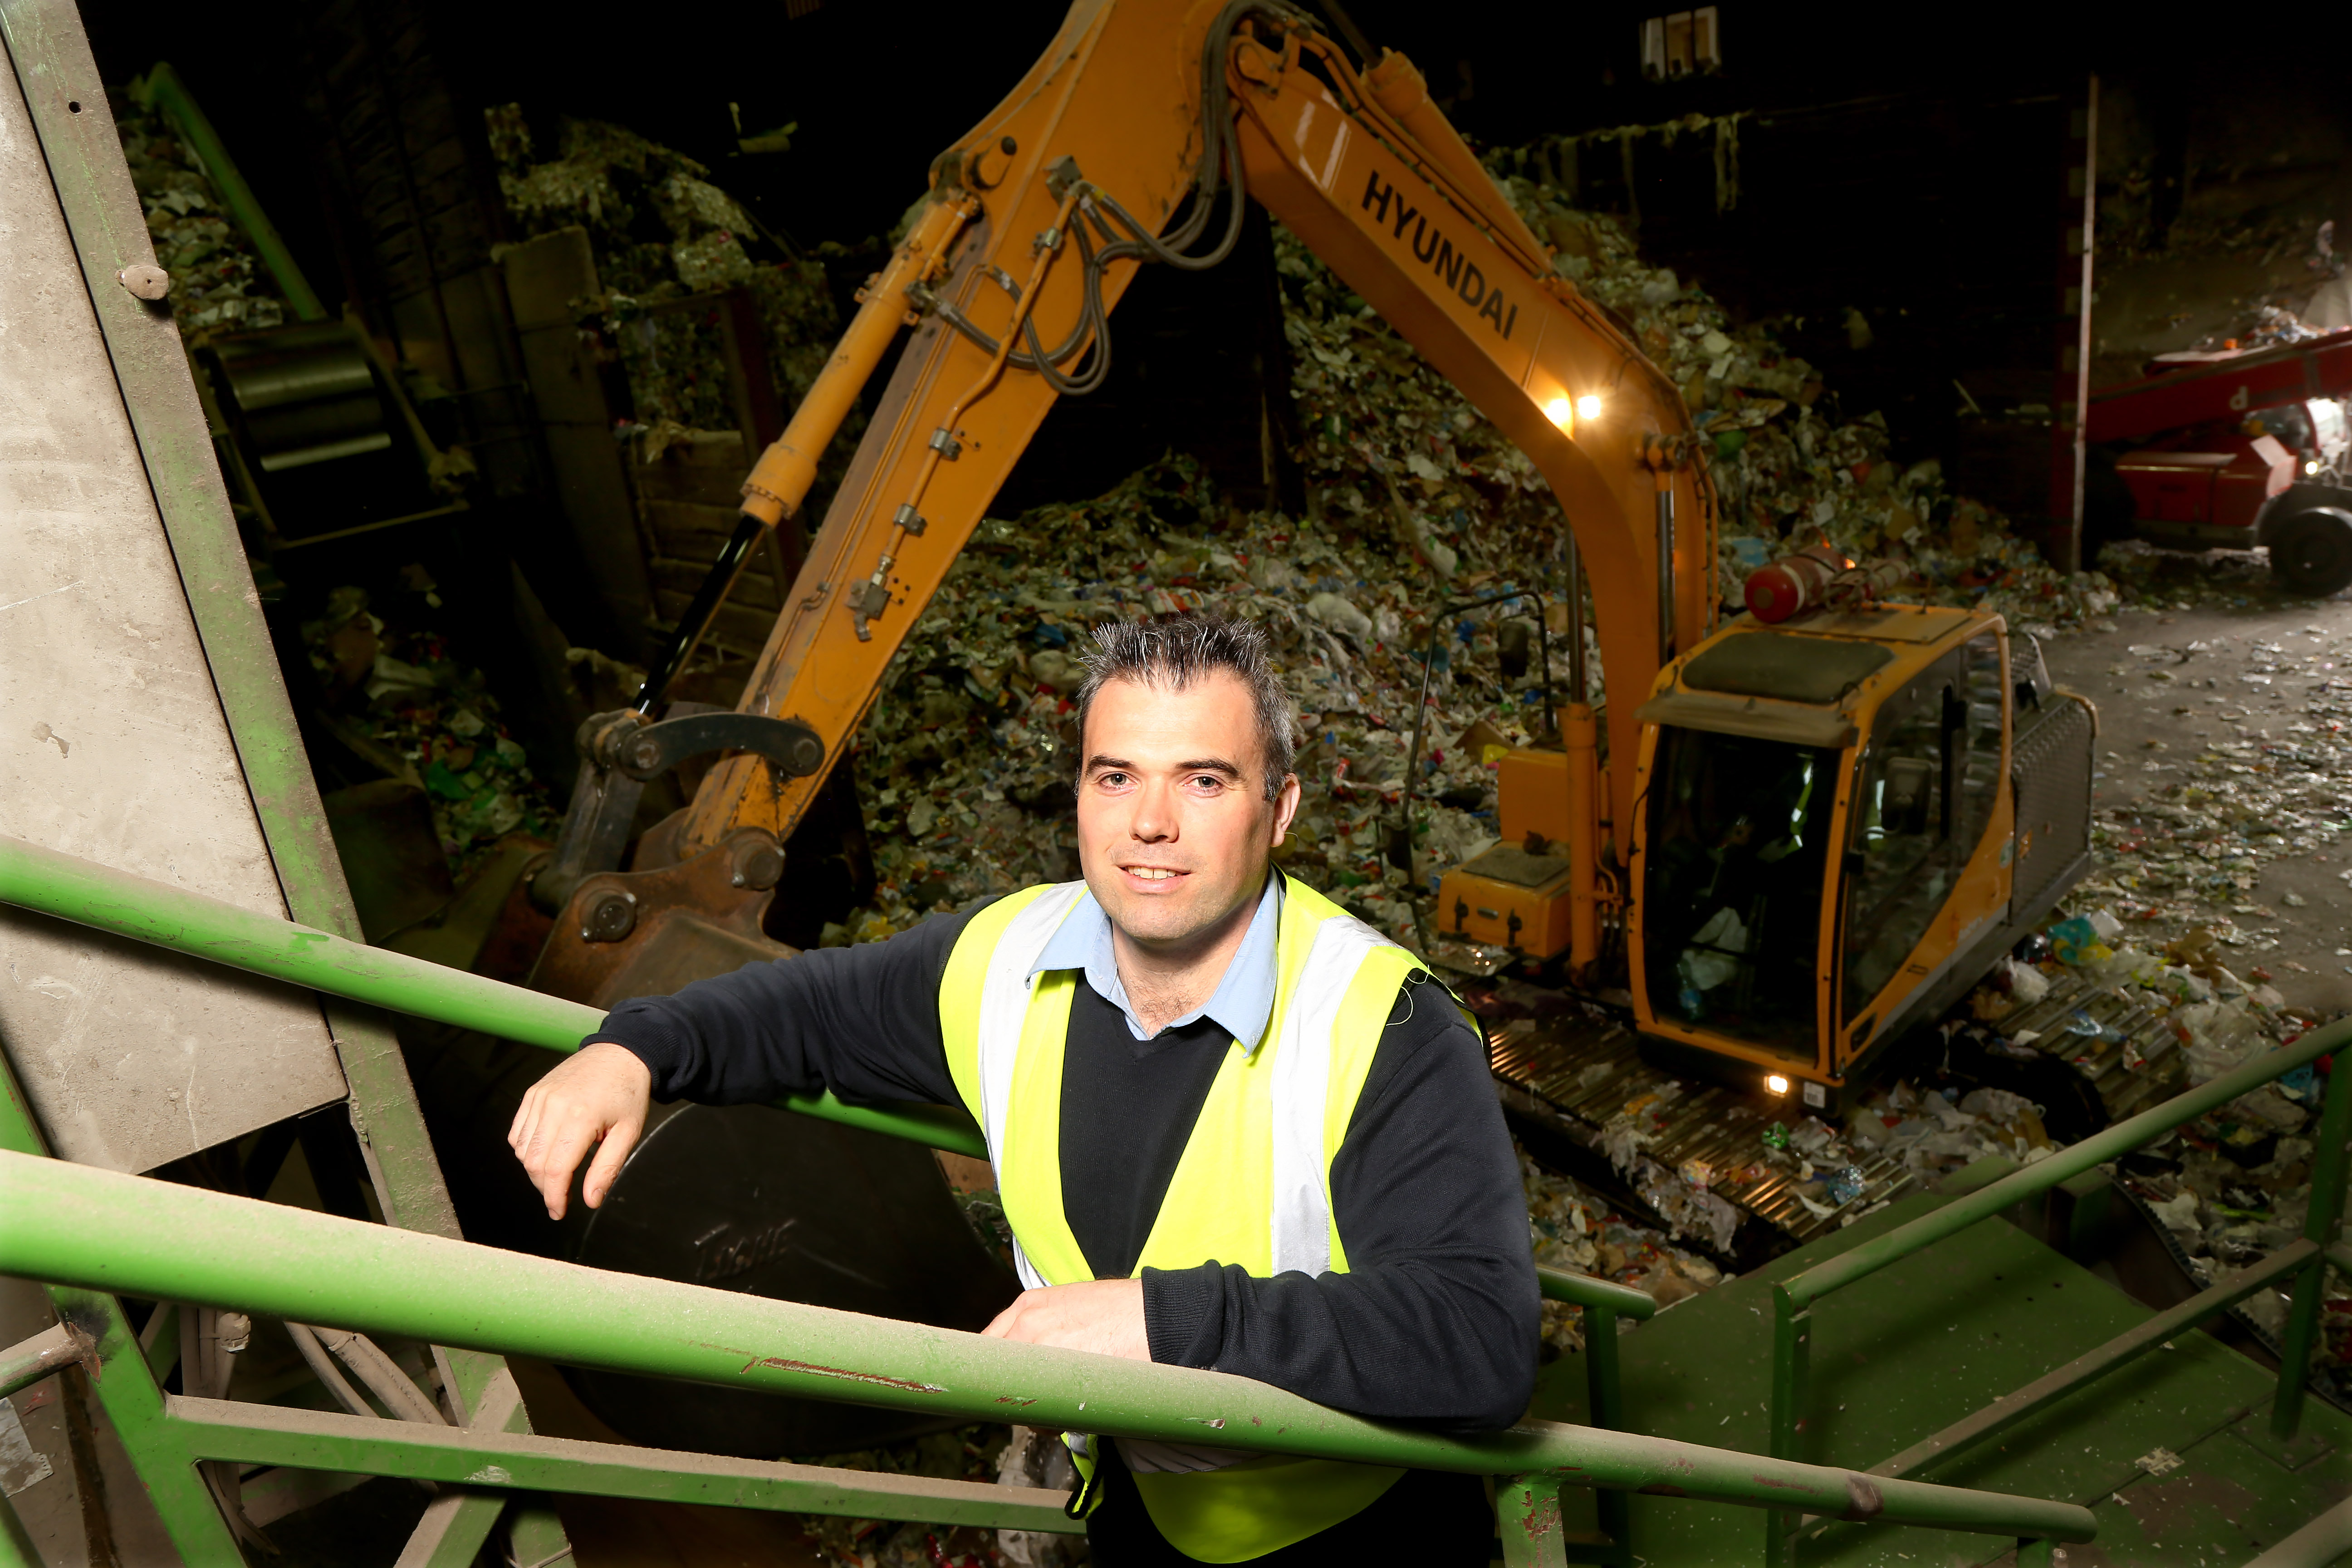 Waste management companies must act on HSE report highlighting injuries due to box collection systems